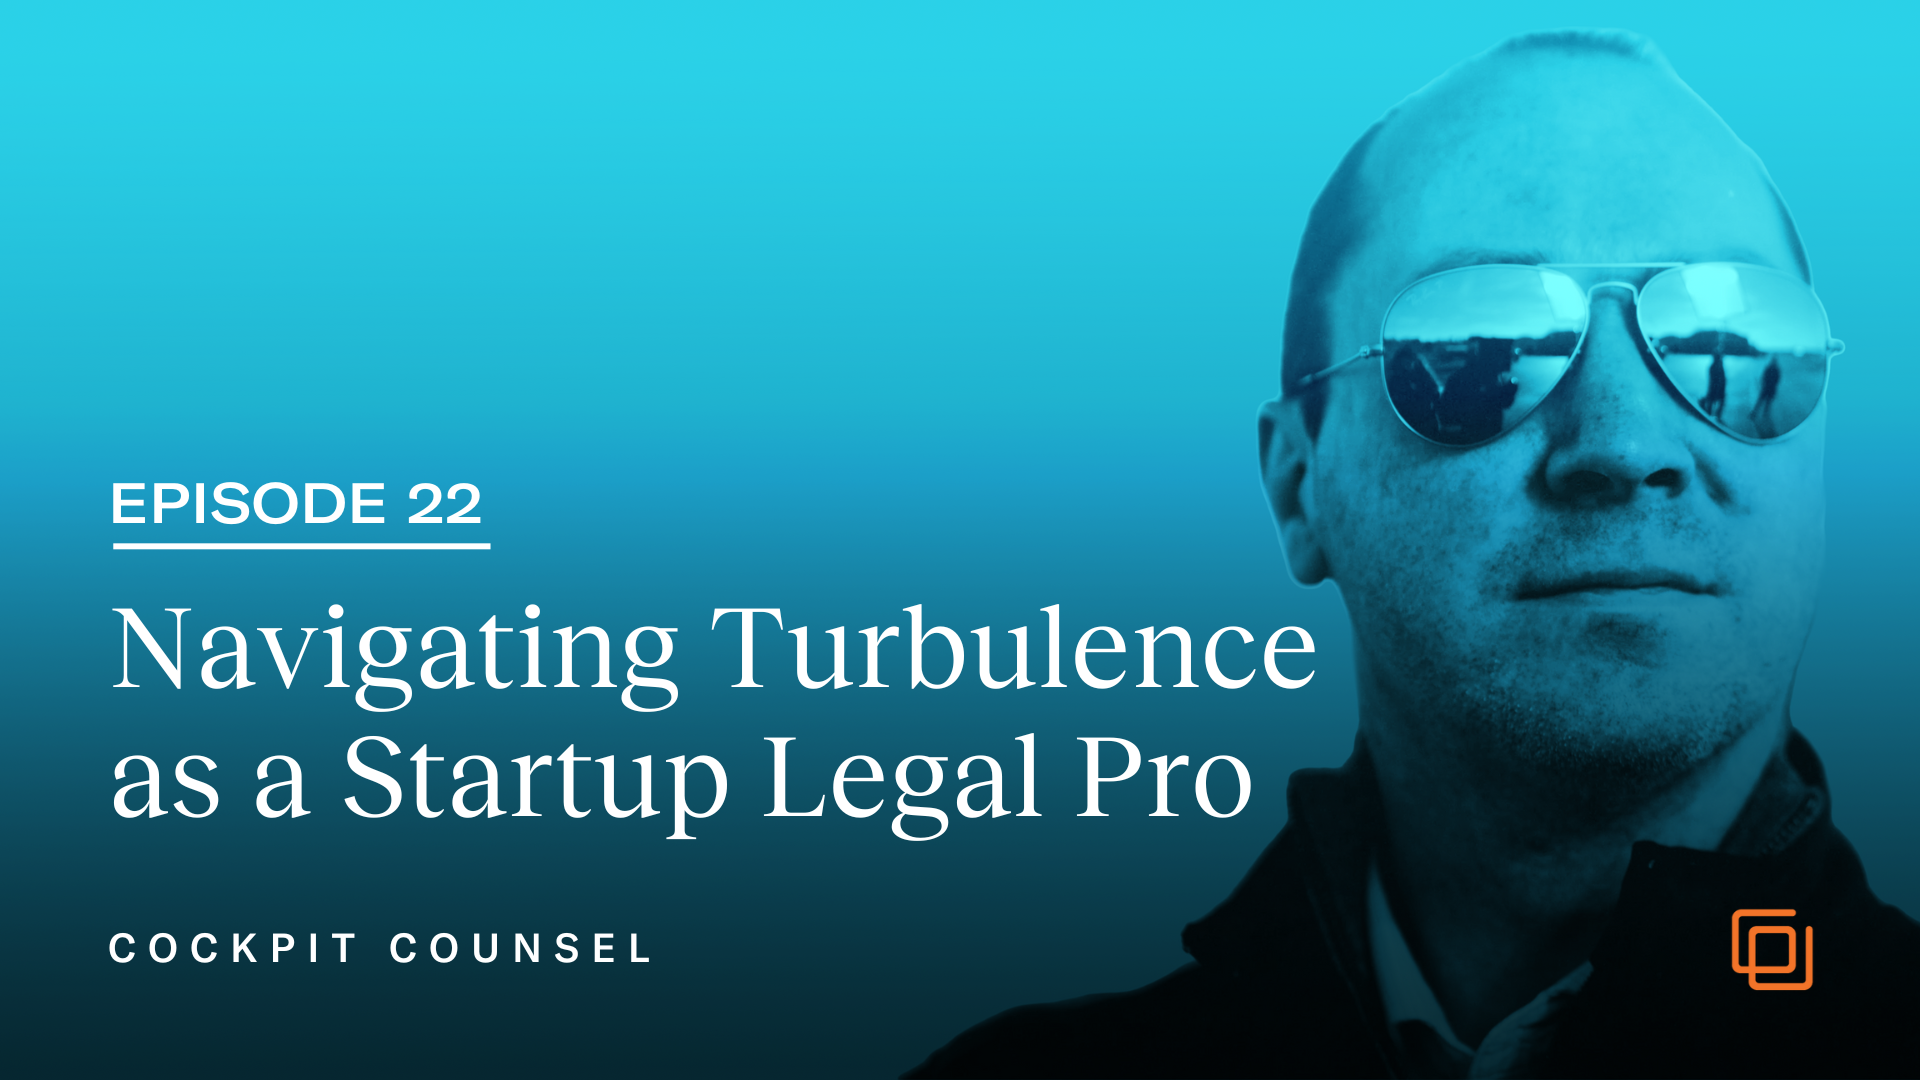 Cockpit Counsel: Navigating Turbulence as a Startup Legal Pro